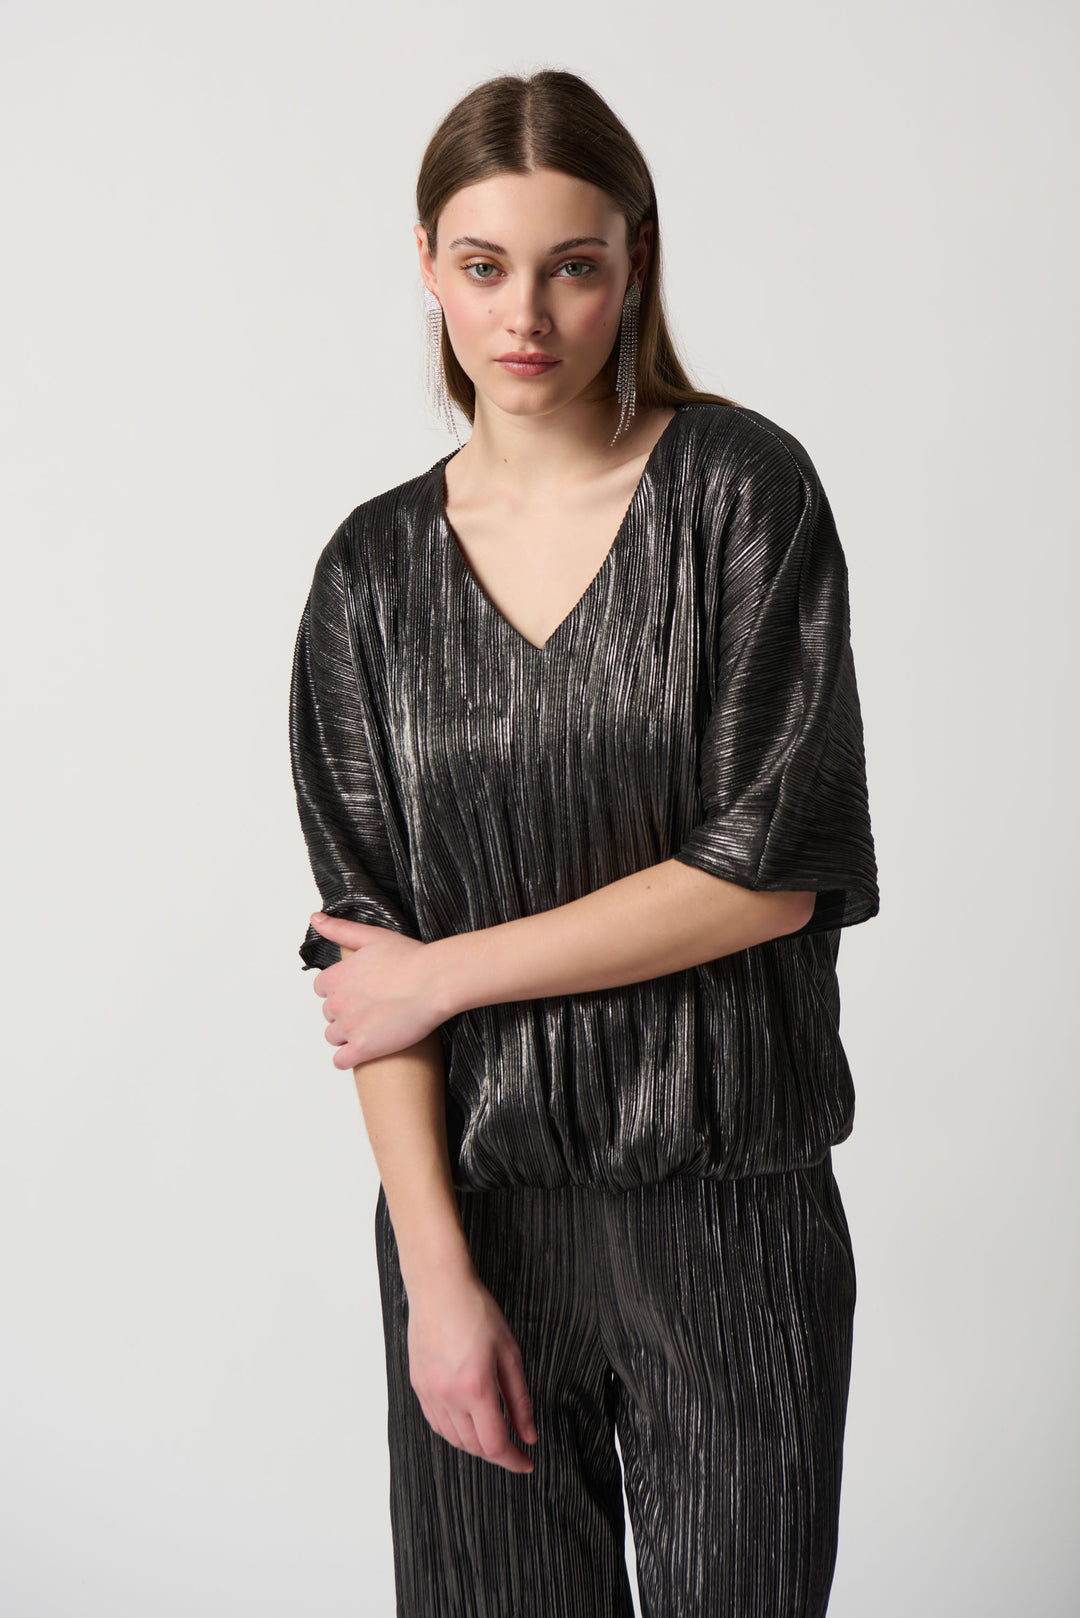 Crafted from a shimmery metallic style fabric with a silvery sheen, this top features a deeper v-neck and 3/4 length sleeves for a classy look. 